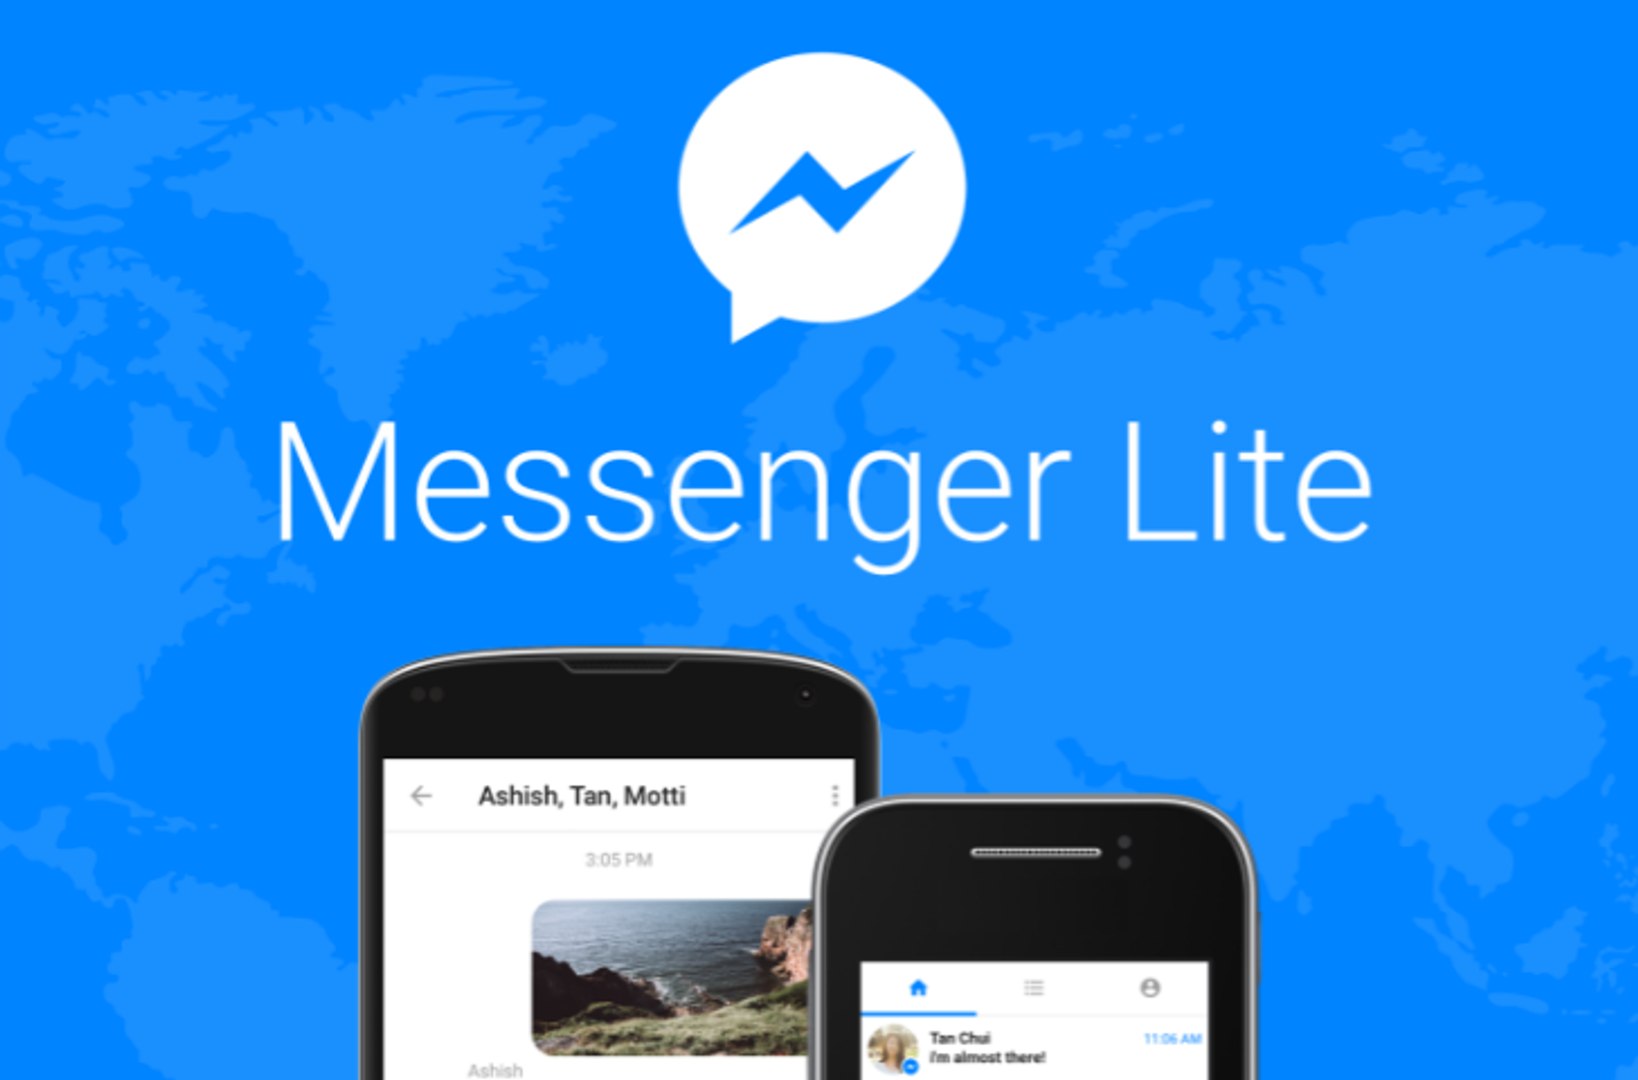 Facebook Messenger Lite 1 1 Apk For Android 2 3 And Up Review With